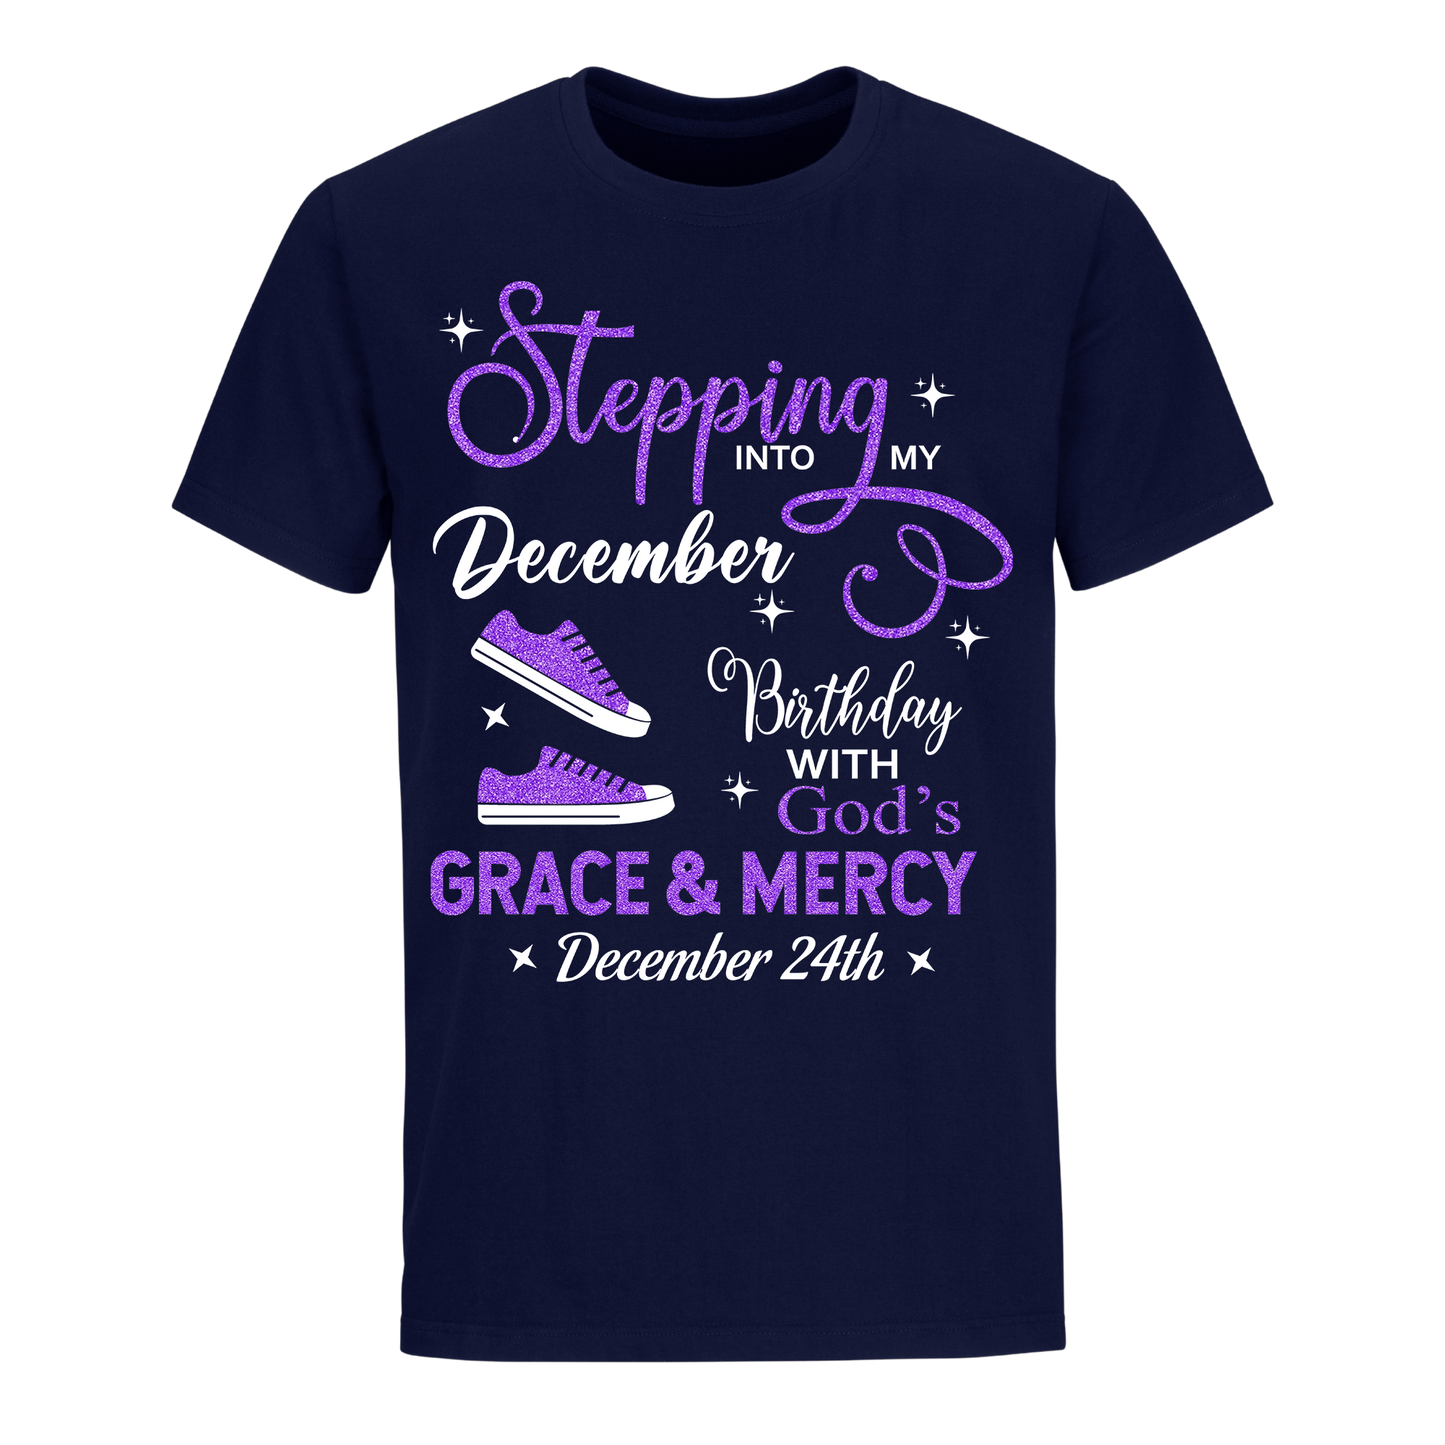 DECEMBER 24 GRACE AND MERCY